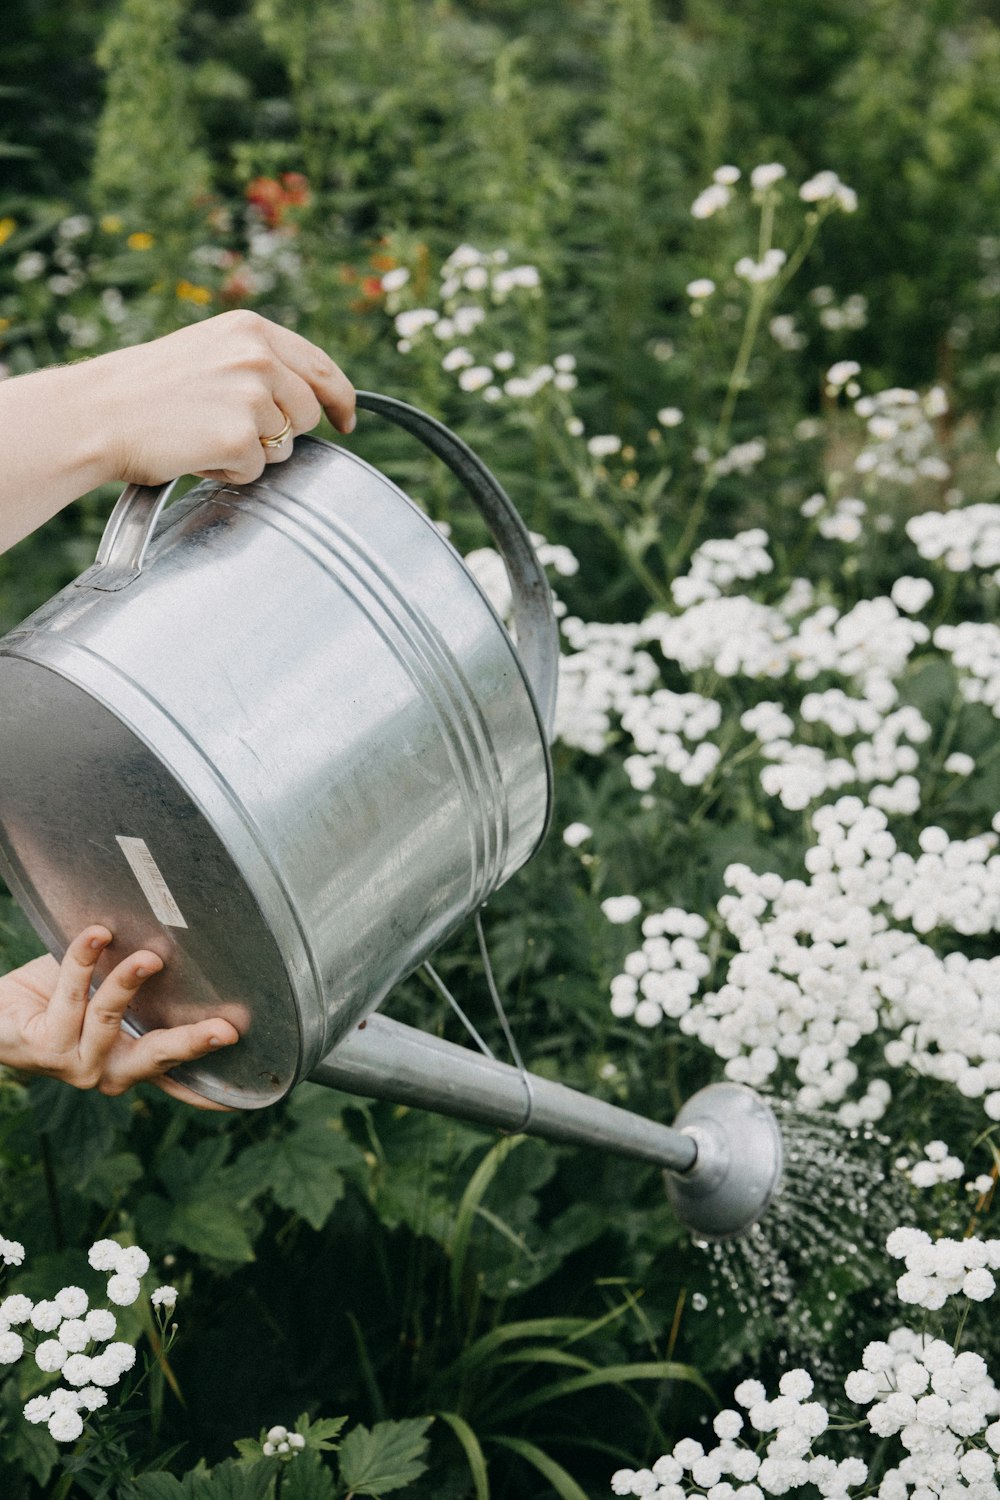 a person watering flowers with a watering can